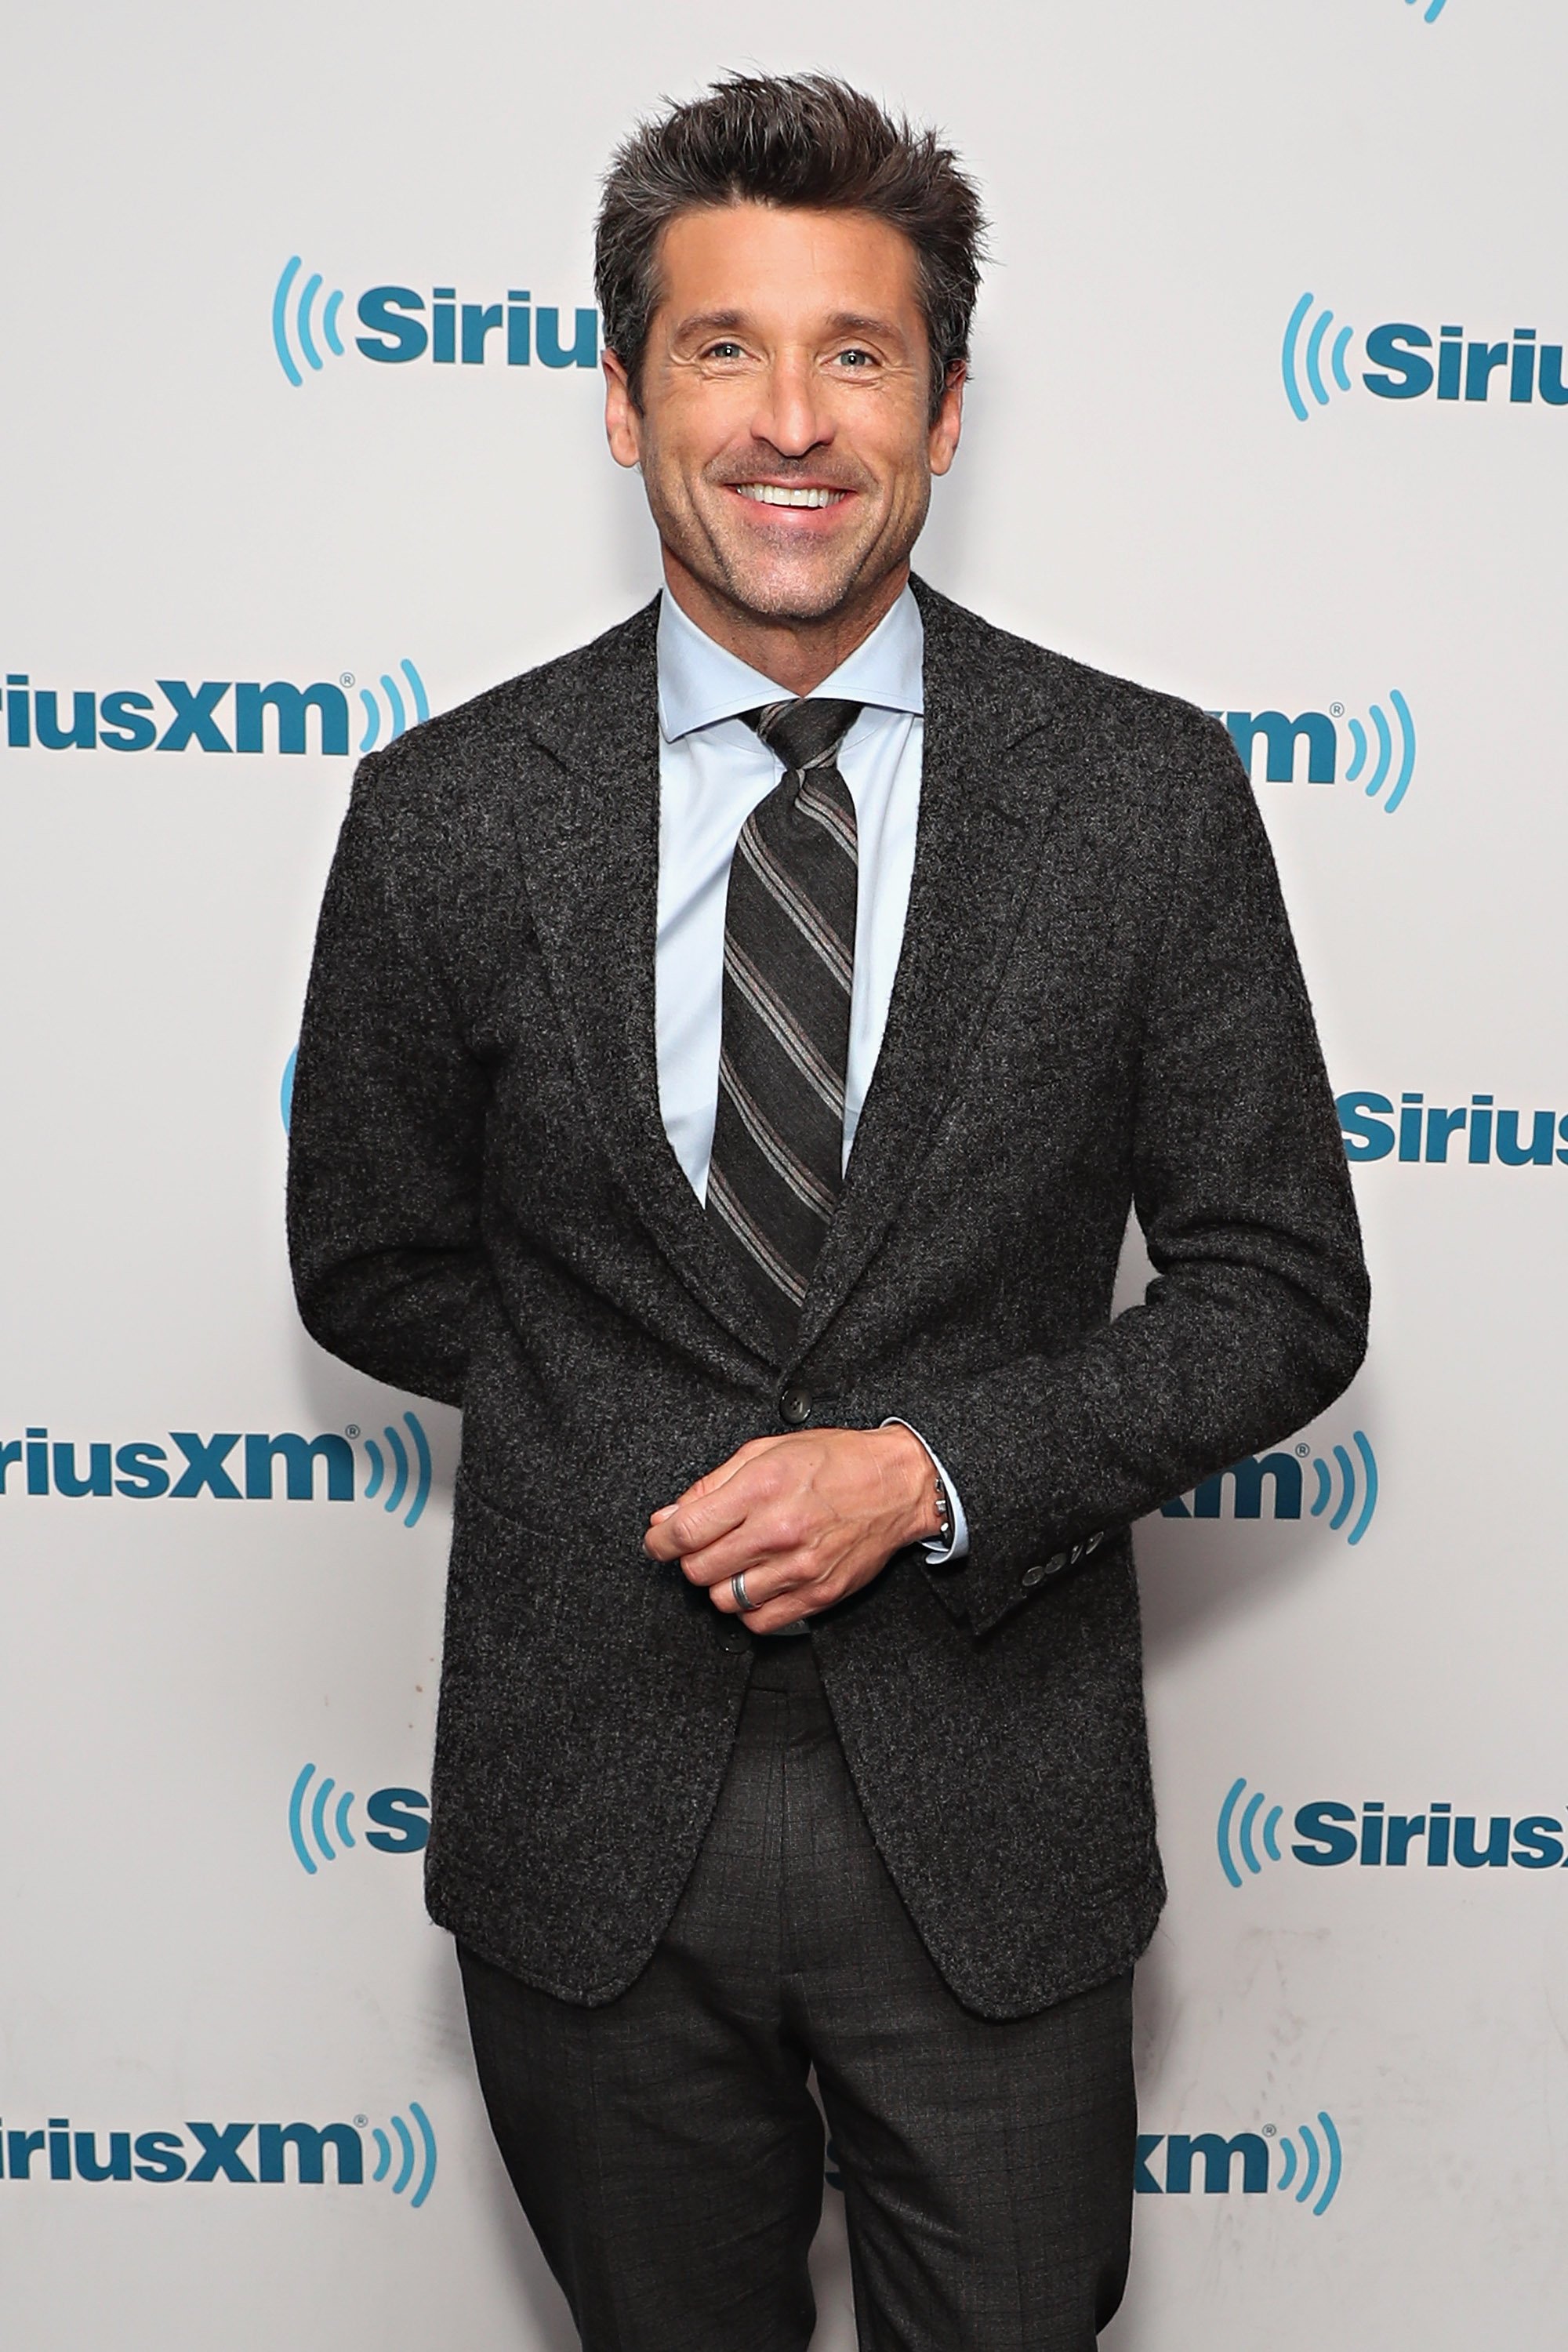 Patrick Dempsey pictured at SiriusXM Studio, 2016, New York City | Photo: Getty Images